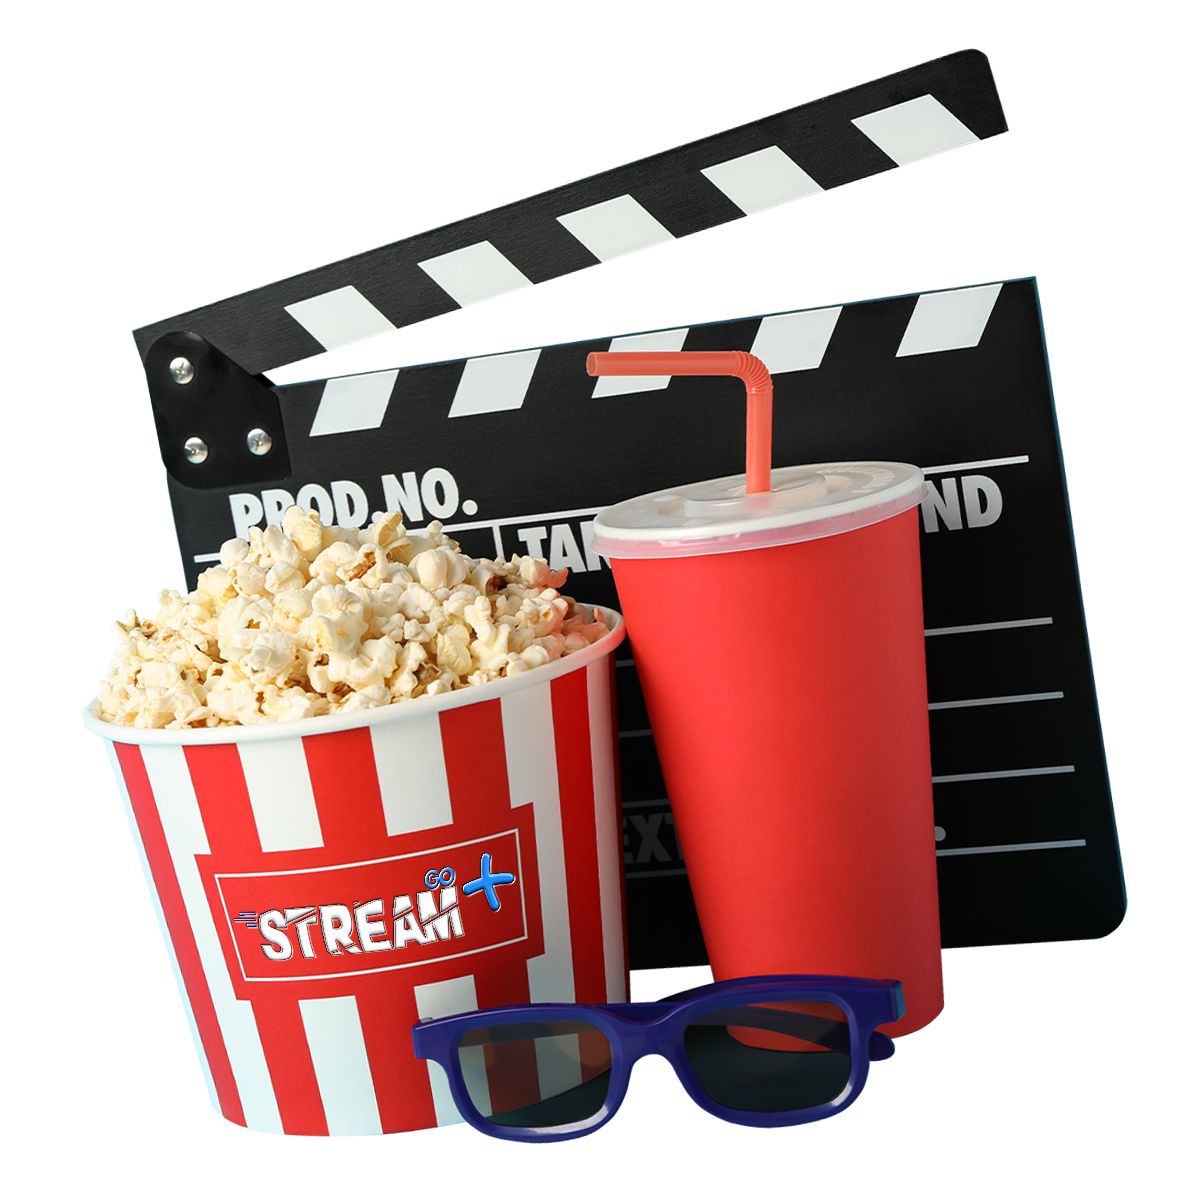 StreamGo Plus - Watch Endless Hours of Movies with StreamGo Plus!